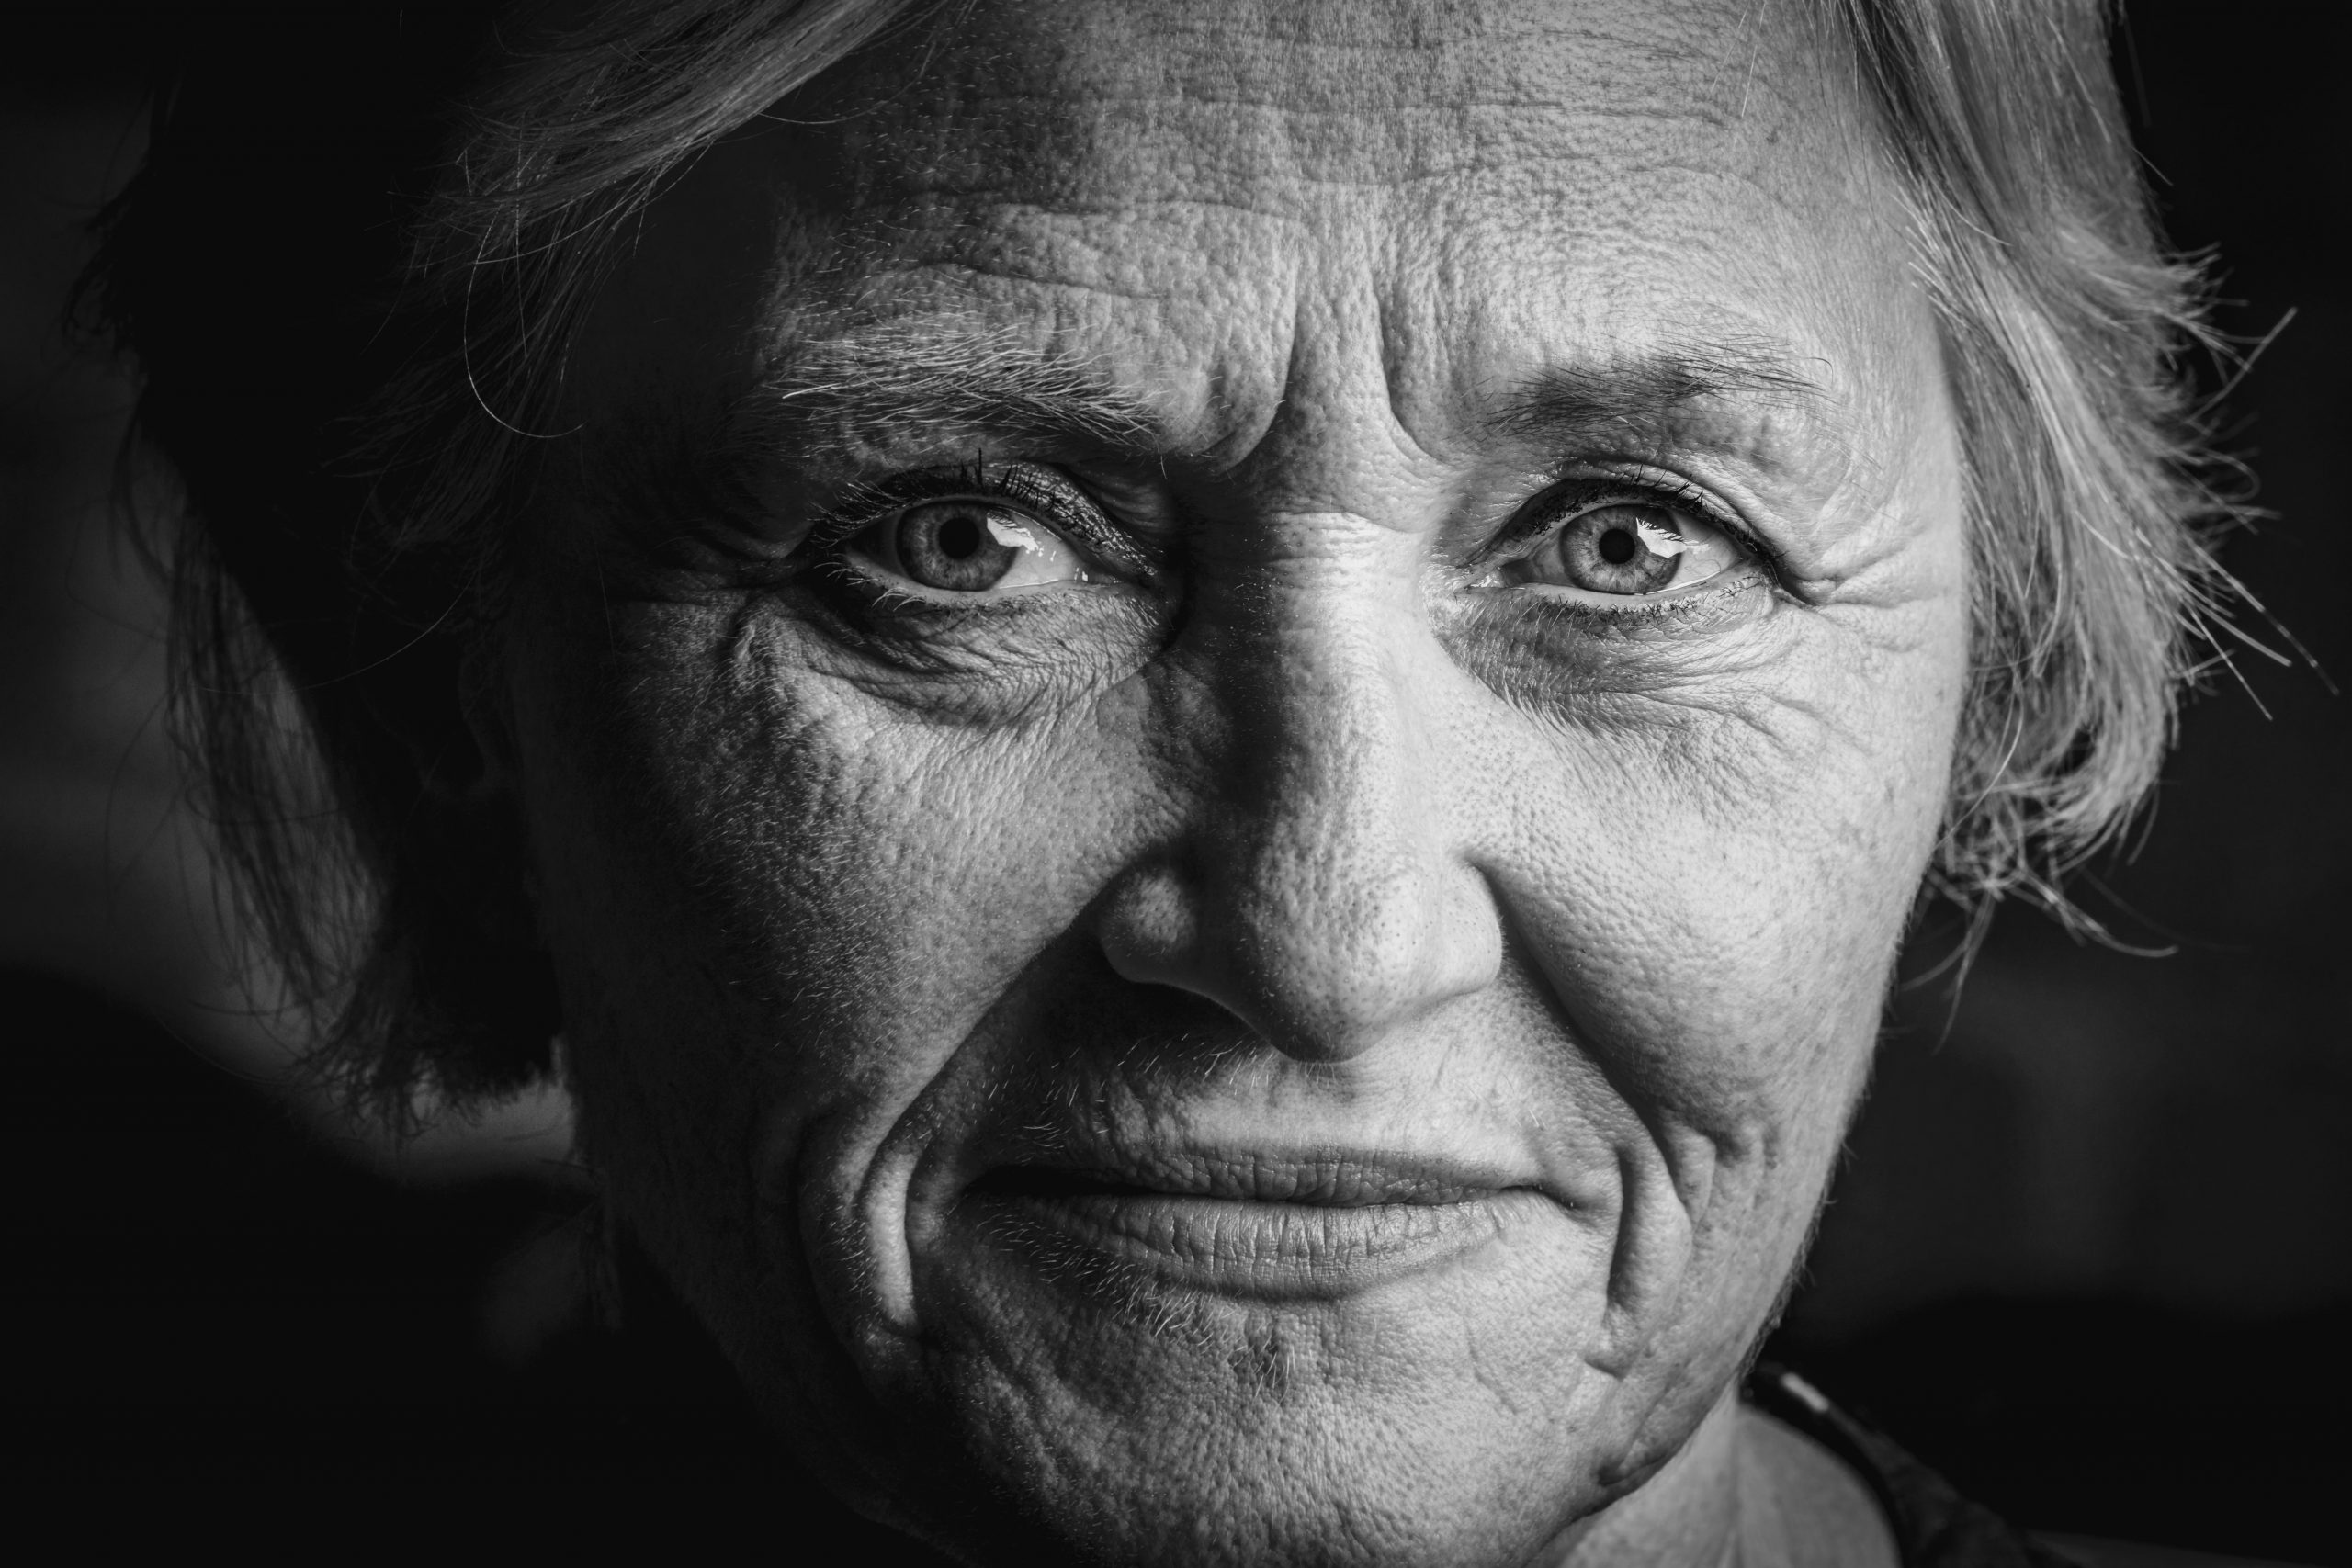 How to Deal with an Elderly Narcissistic Mother: 12 Tips To Save Your Sanity